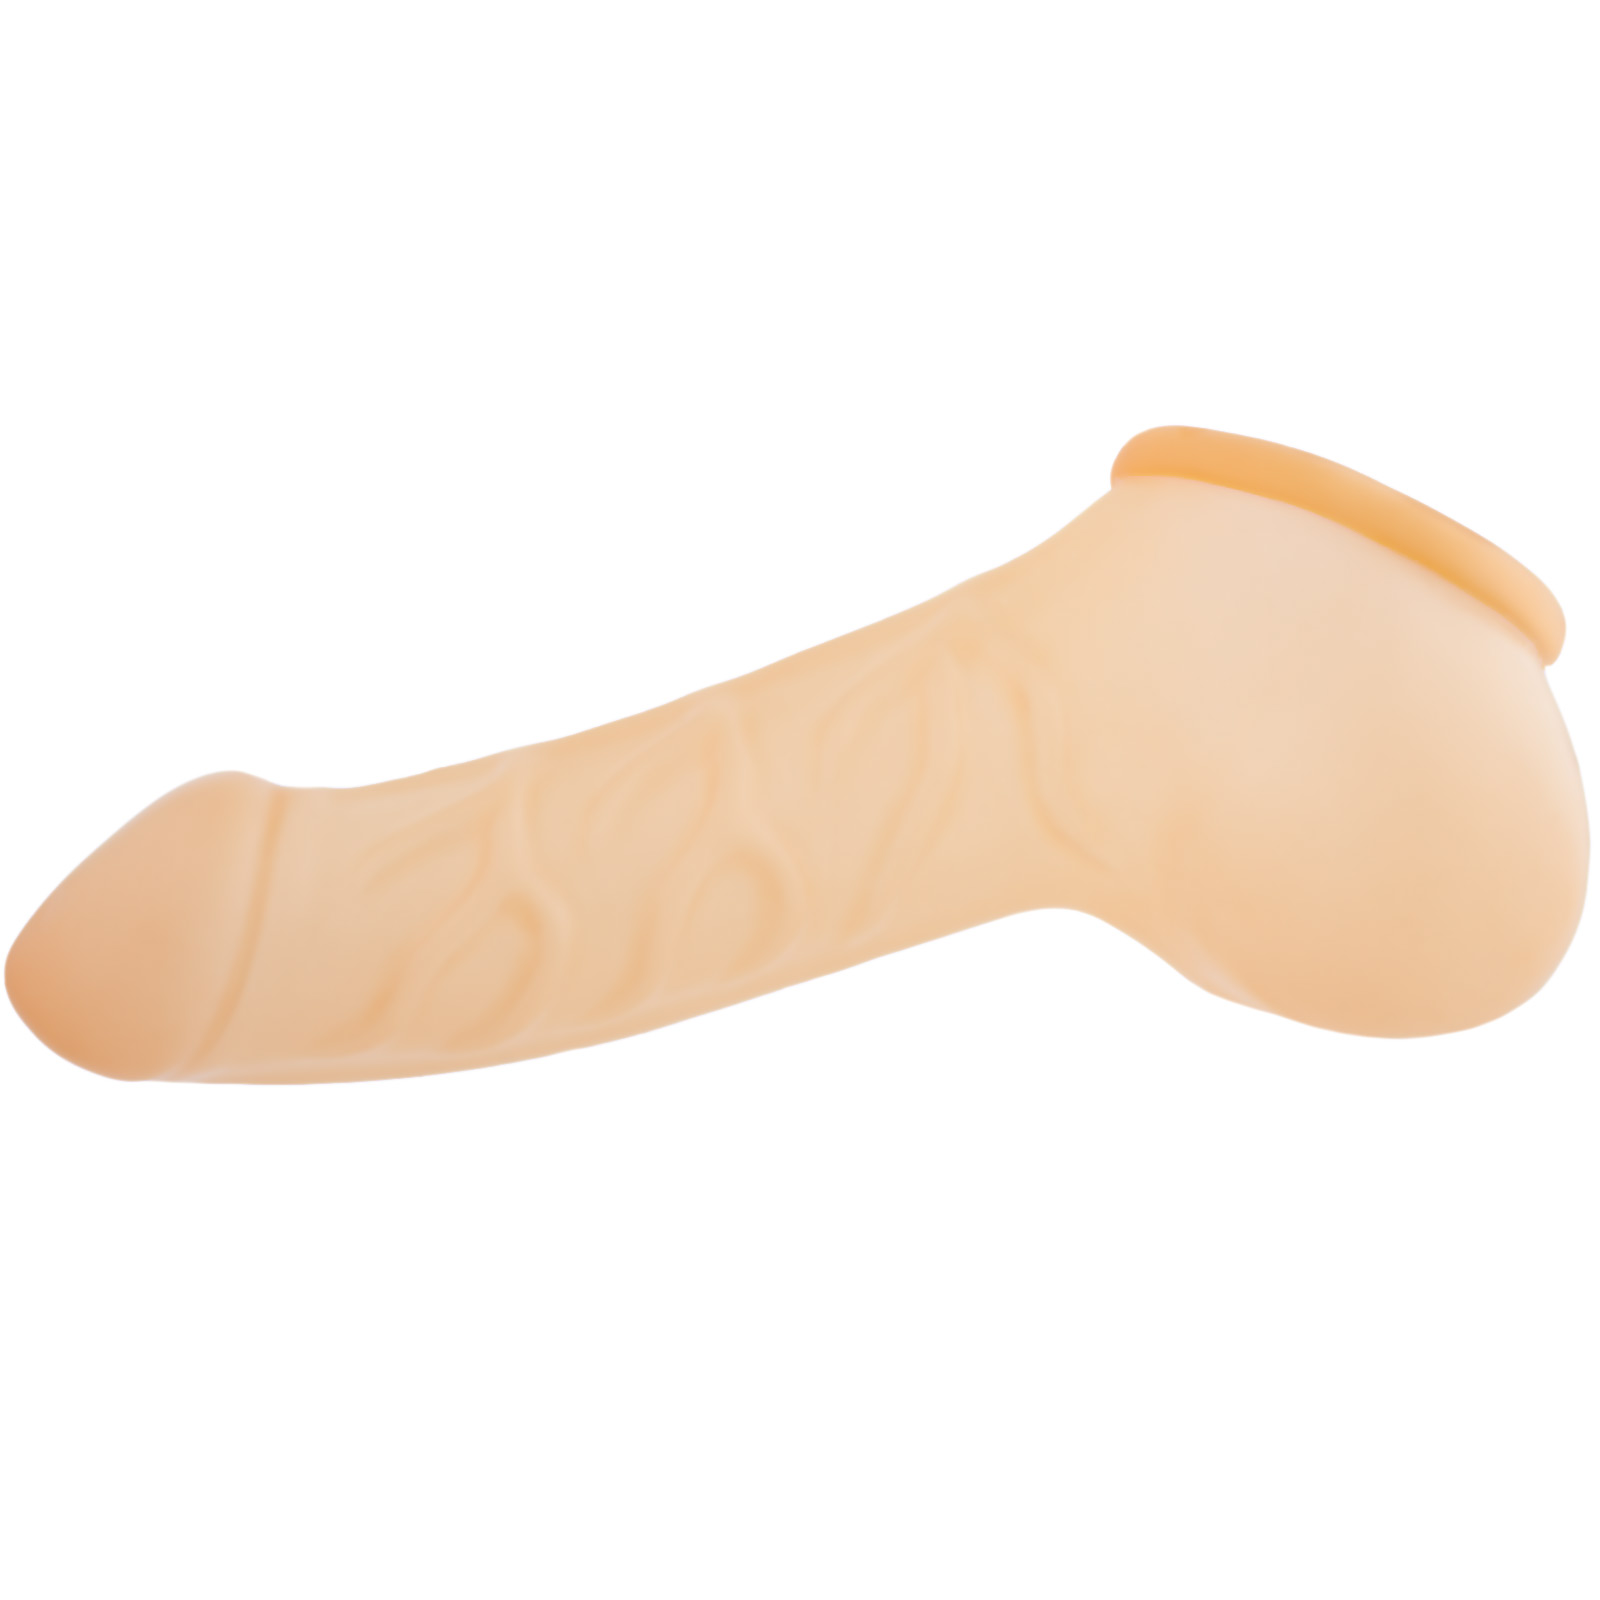 Toylie Latex Penis Sleeve «FRANZ» semi-transparent, with strong veins and molded scrotum - suitable for vegans